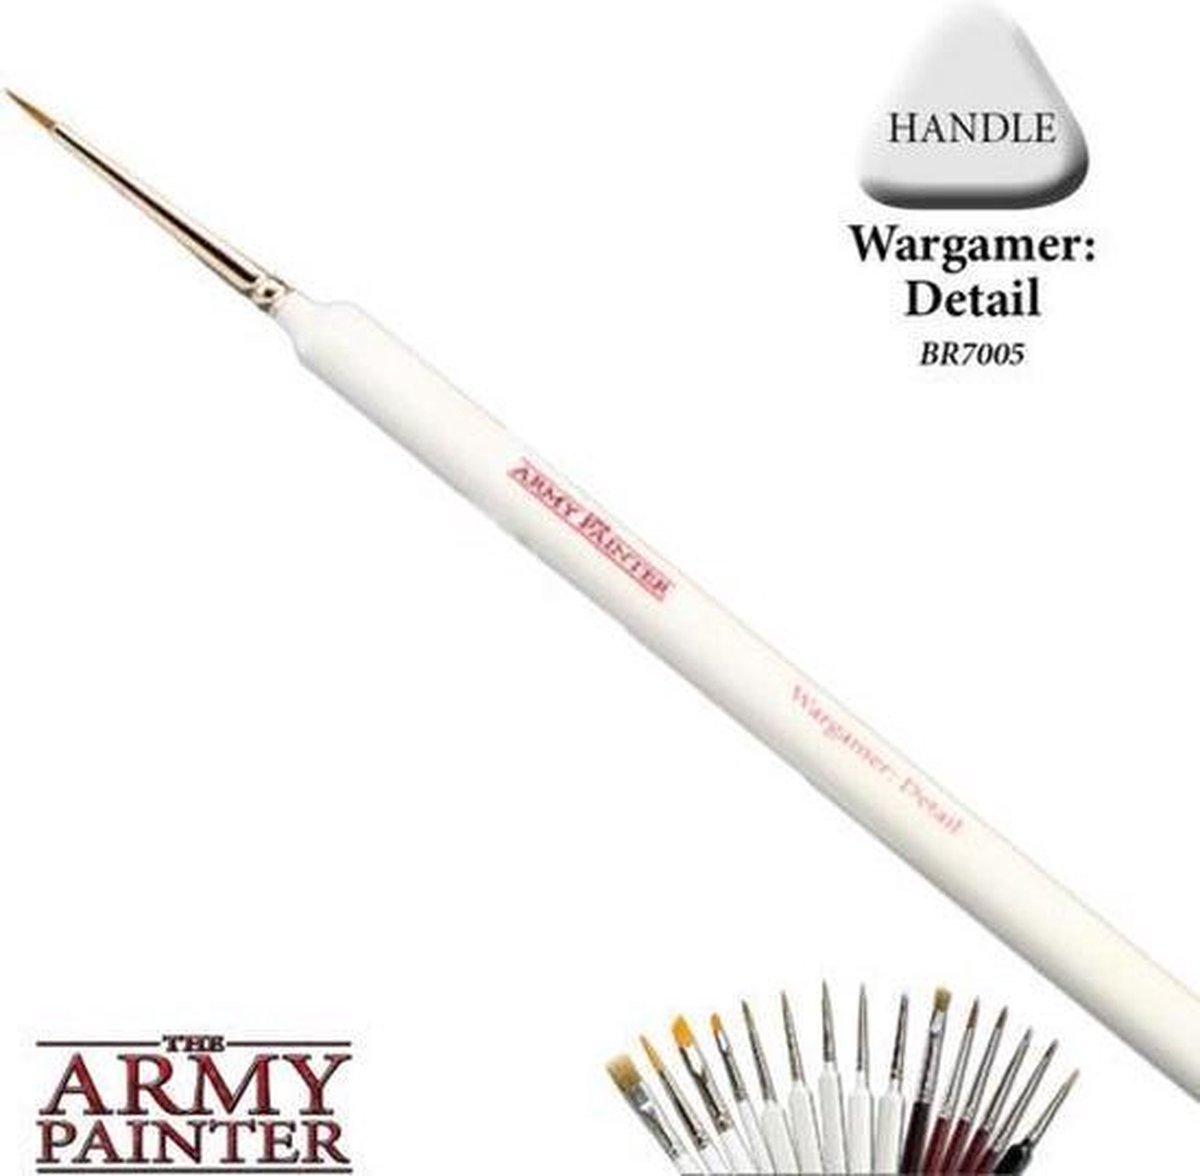 The Army Painter Wargamer Brush - Detail - The Army Painter